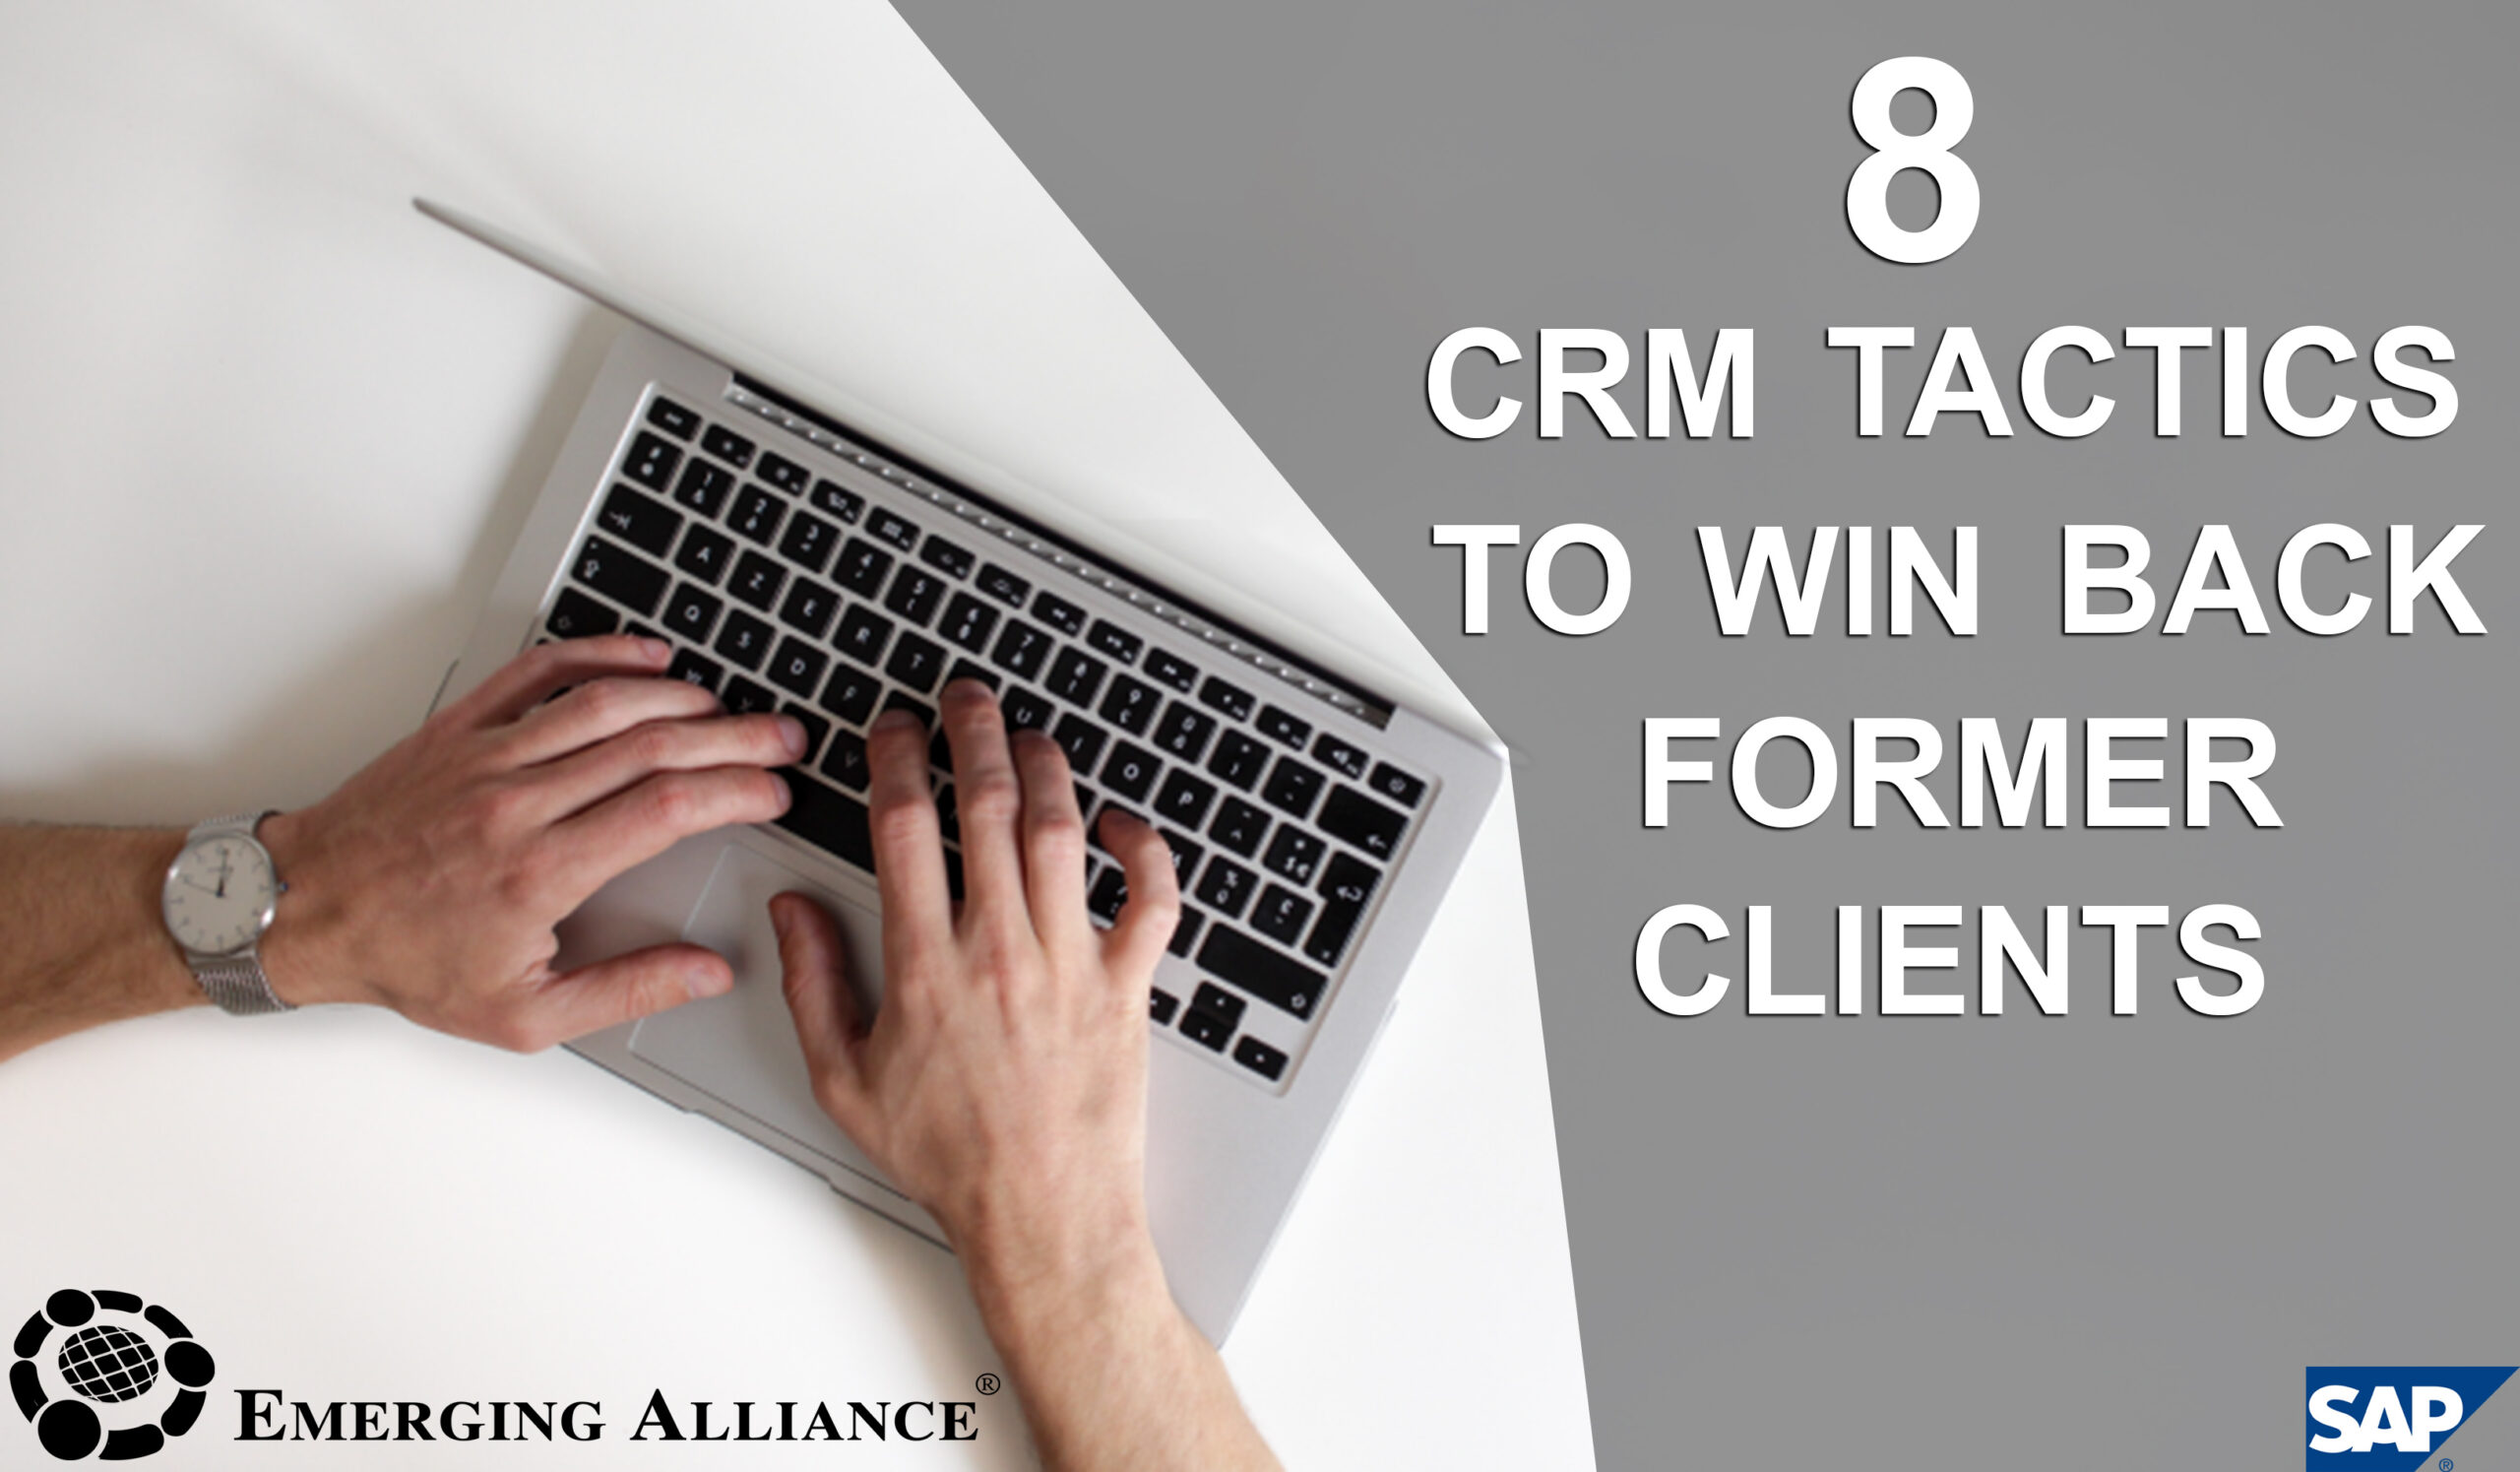 CRM tactics to win back former client